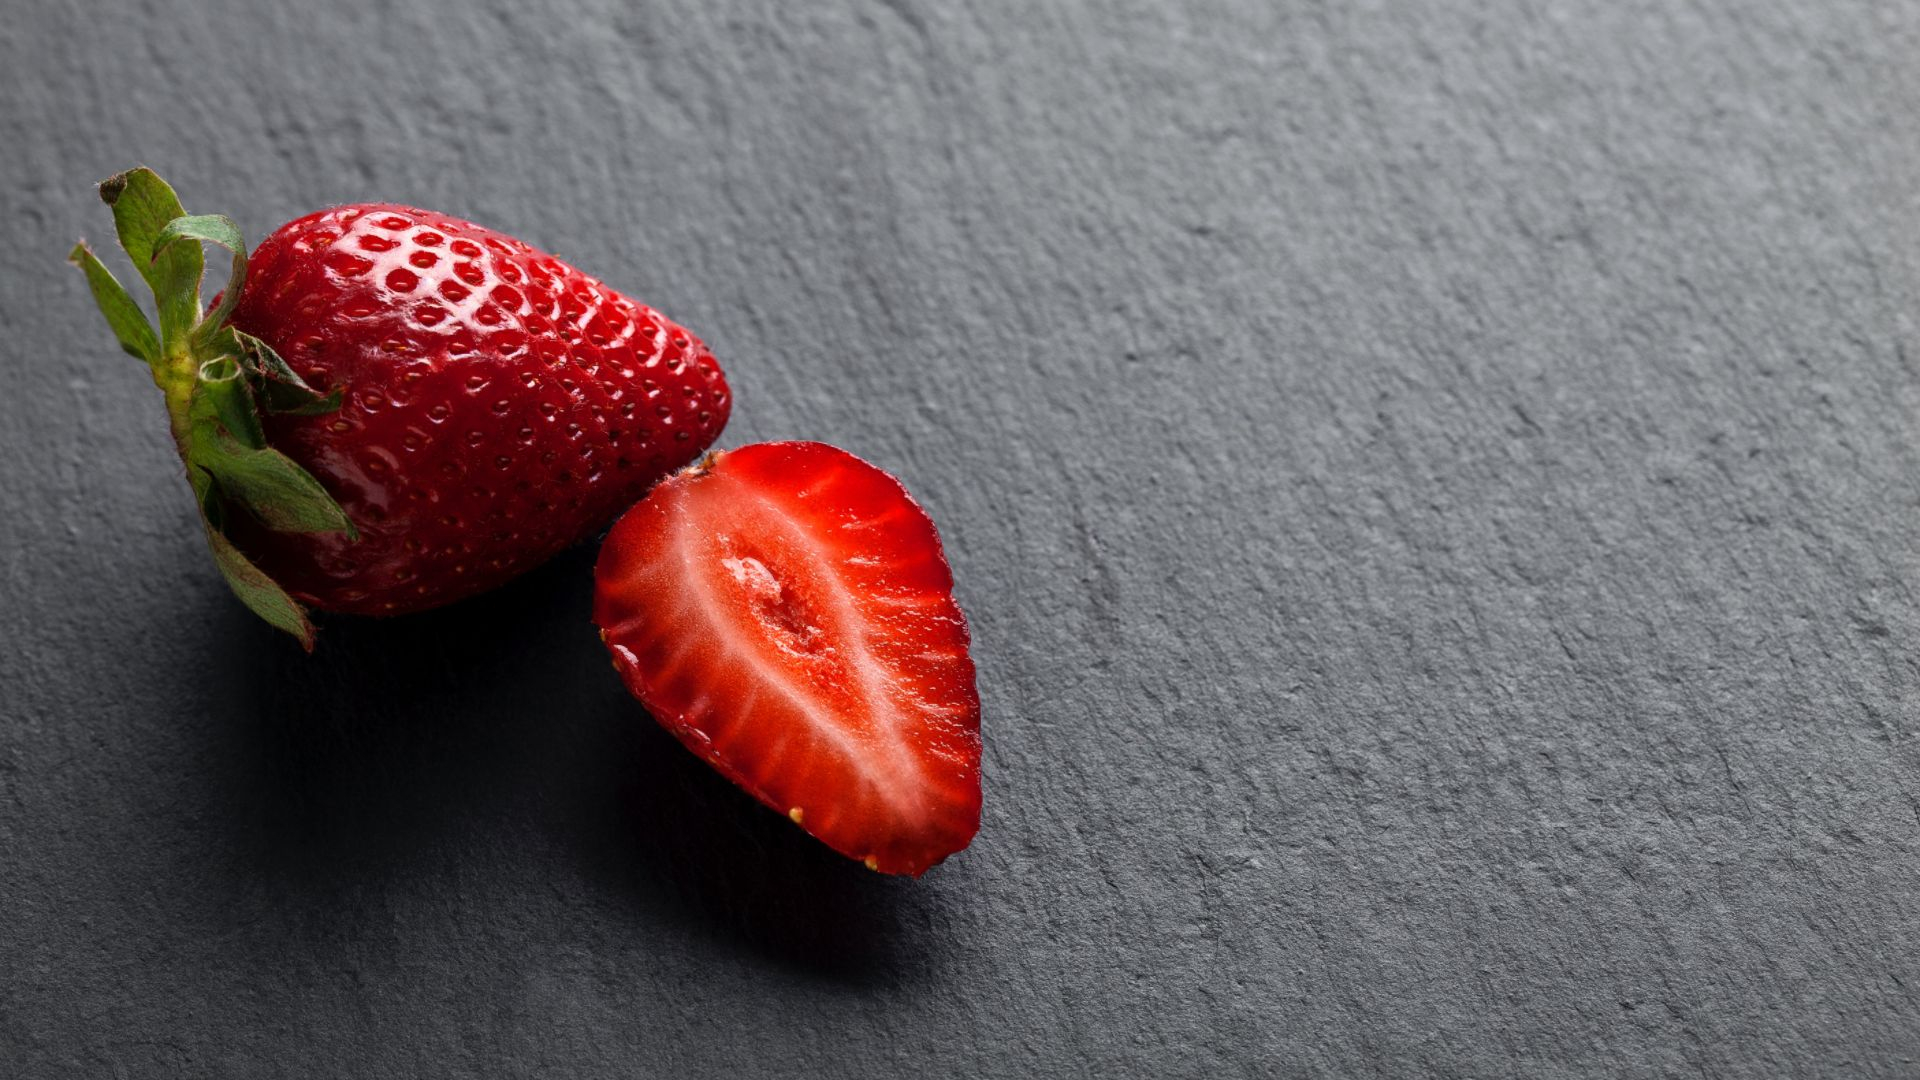 1920x1080 Strawberry Wallpaper: Top Free Strawberry Backgrounds, Pictures \u0026 Images Download